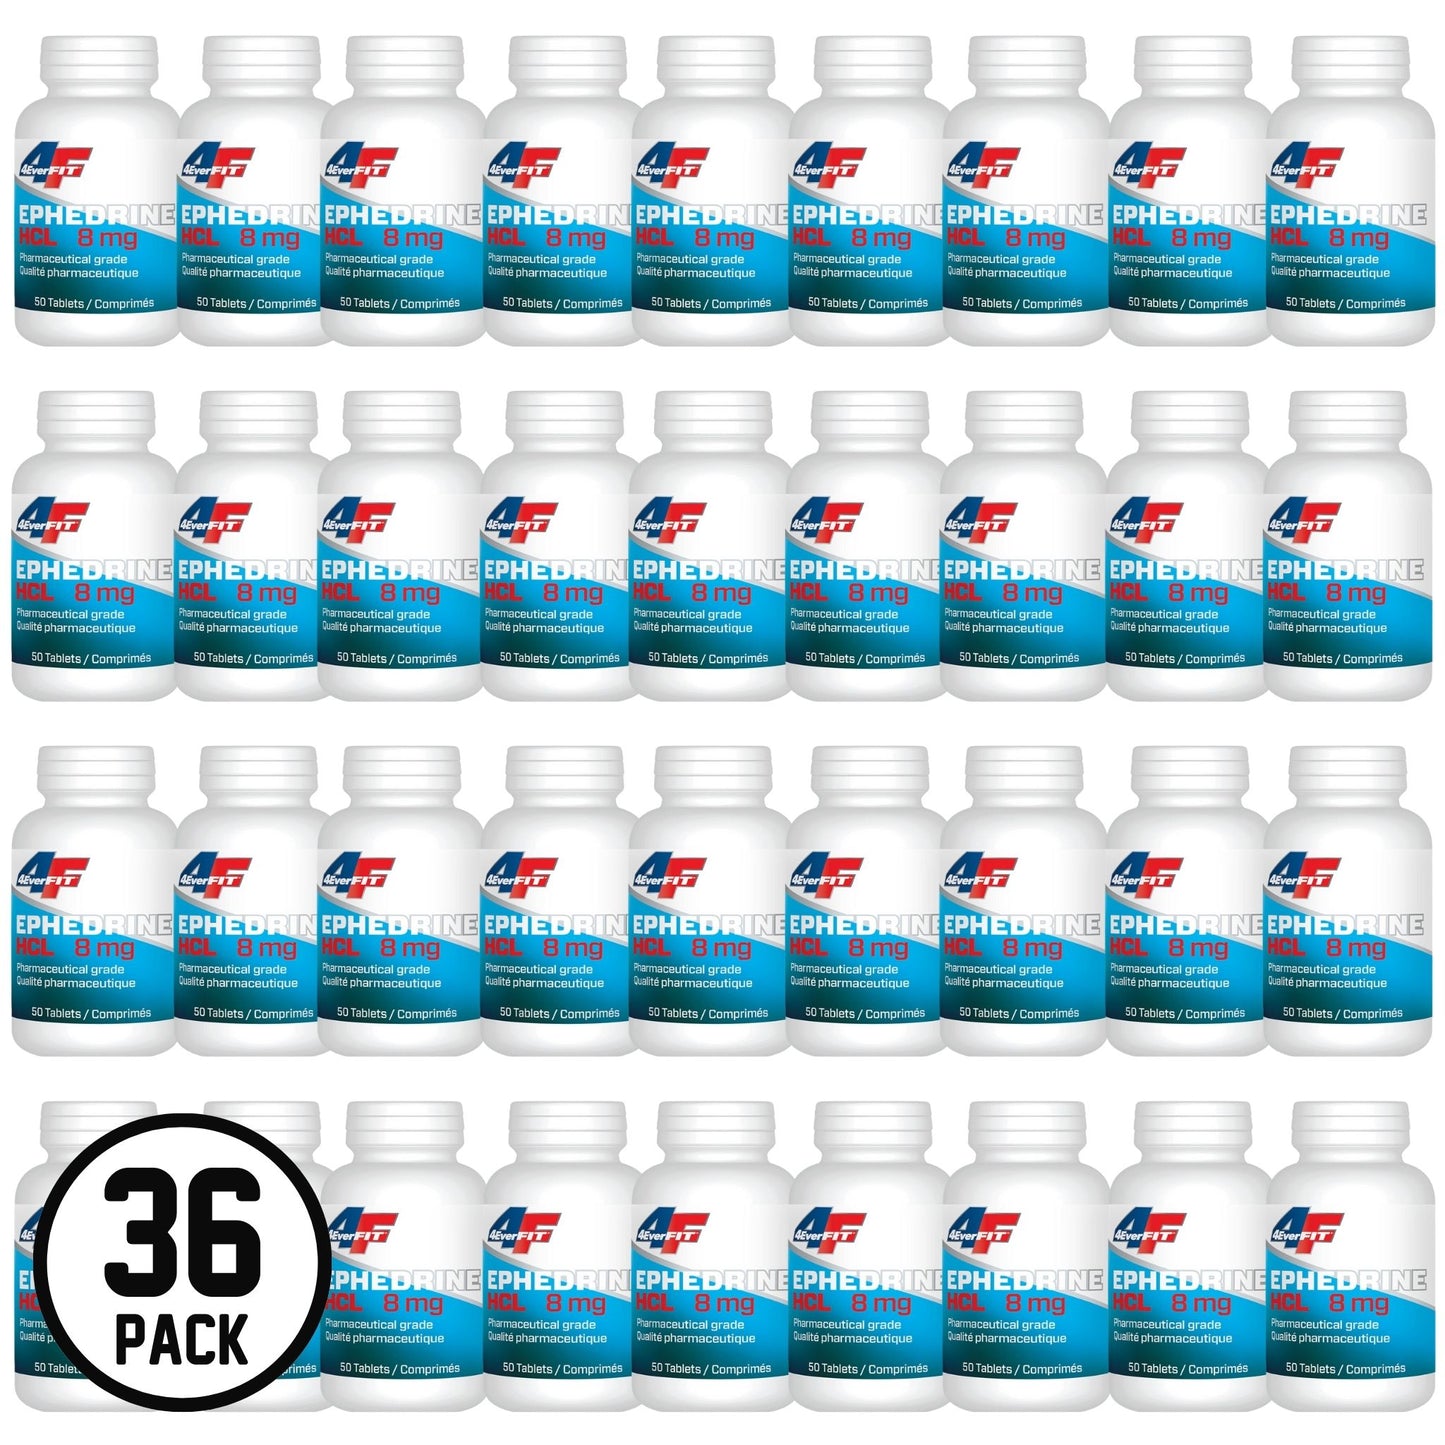 4Ever Fit Ephedrine 8mg, Pharmaceutical Grade (Ephedrine HCL Ships within Canada Only)